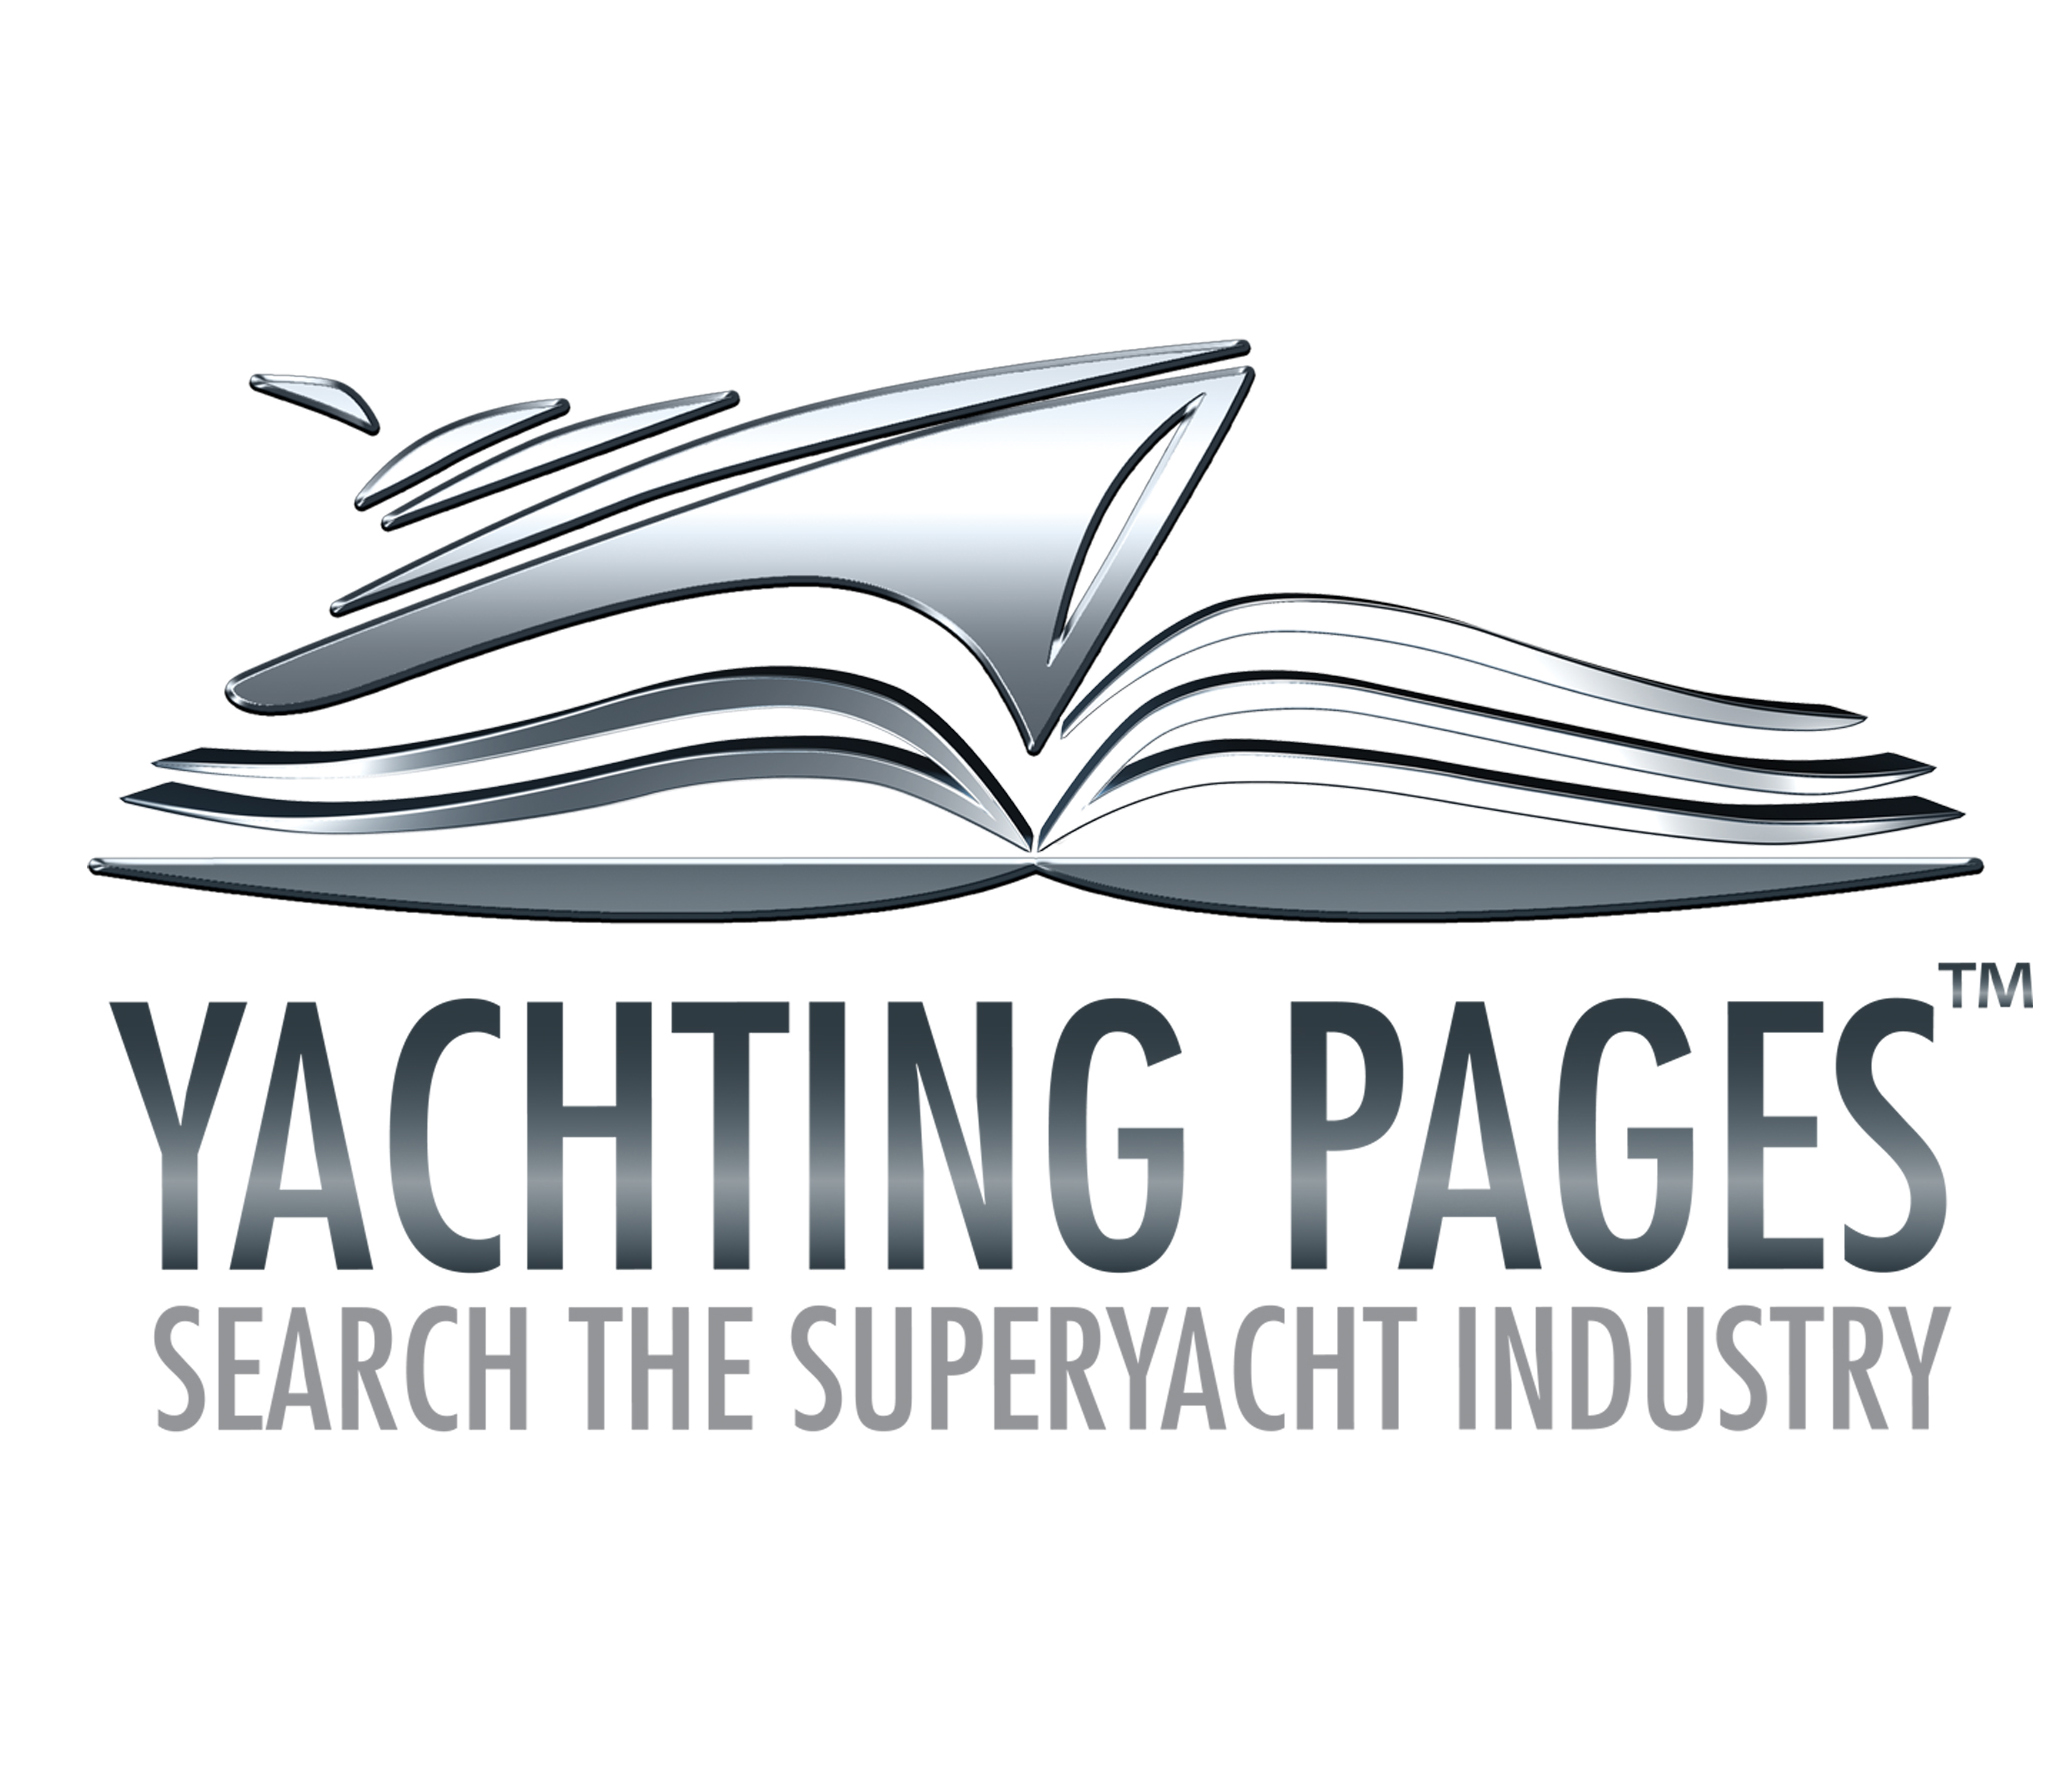 the yachting pages